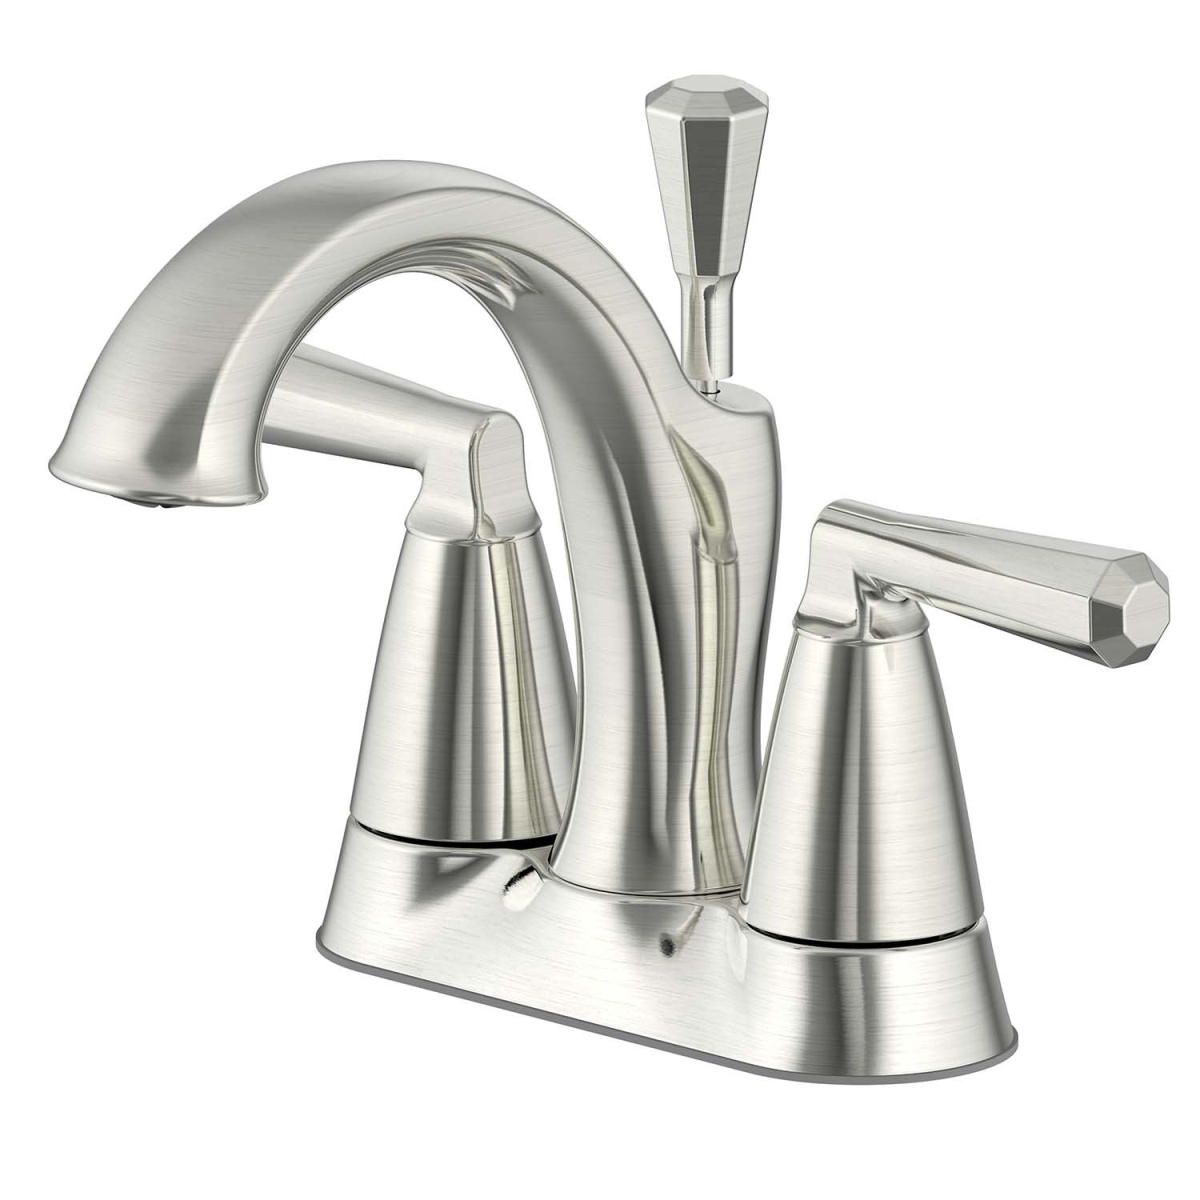 Uf45913 4 In. Two-handle Lavatory Faucet - Brushed Nickel